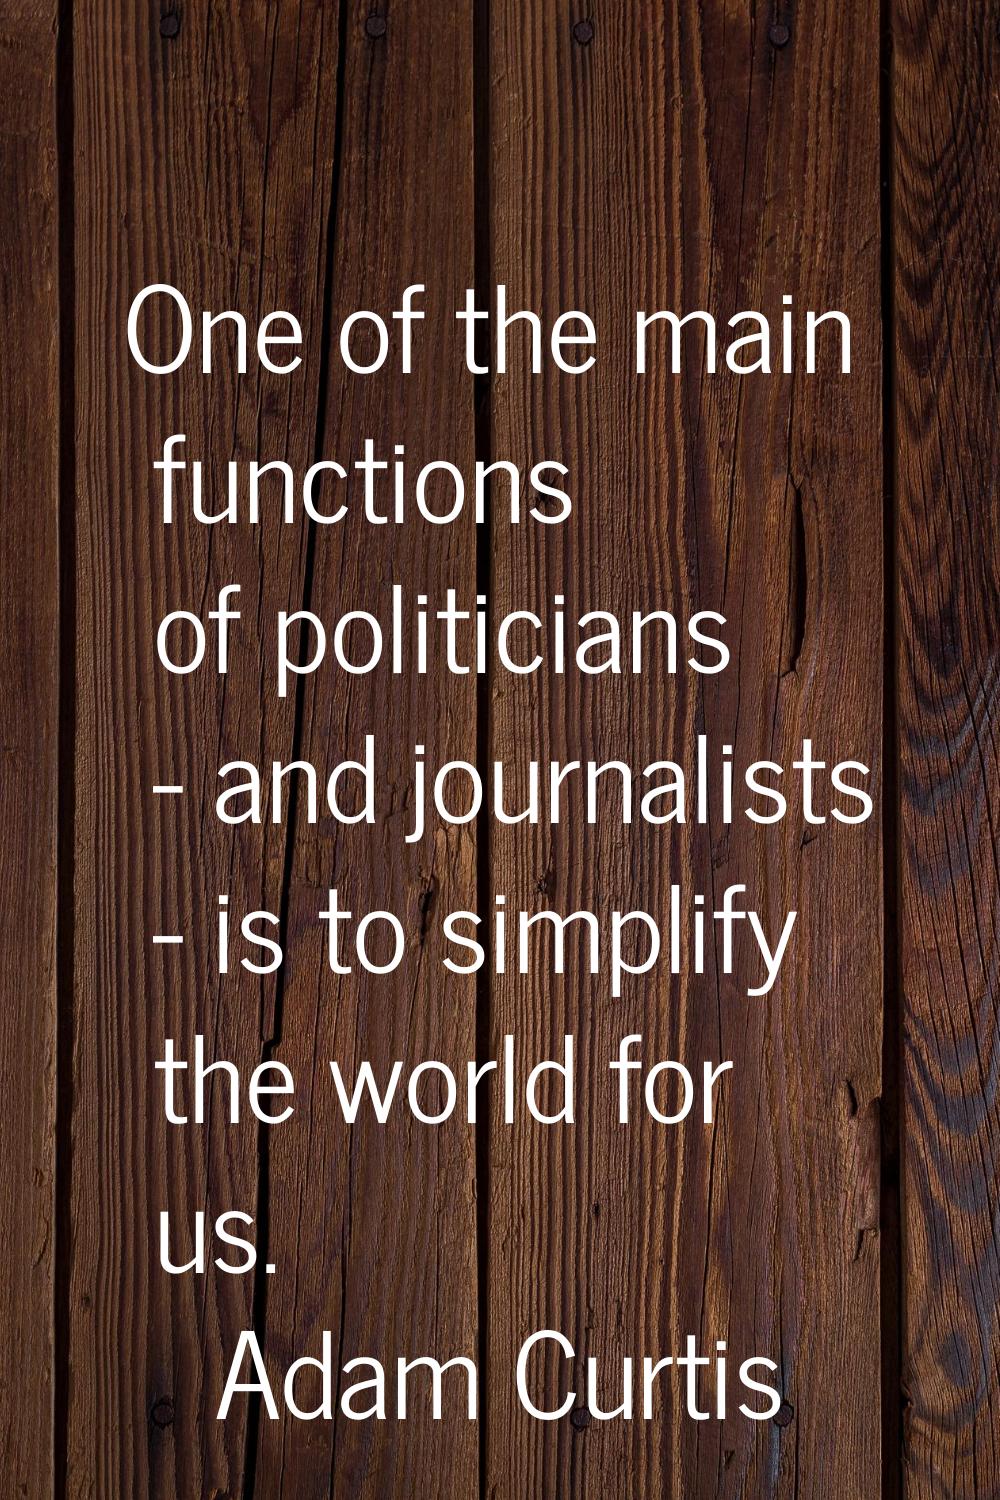 One of the main functions of politicians - and journalists - is to simplify the world for us.